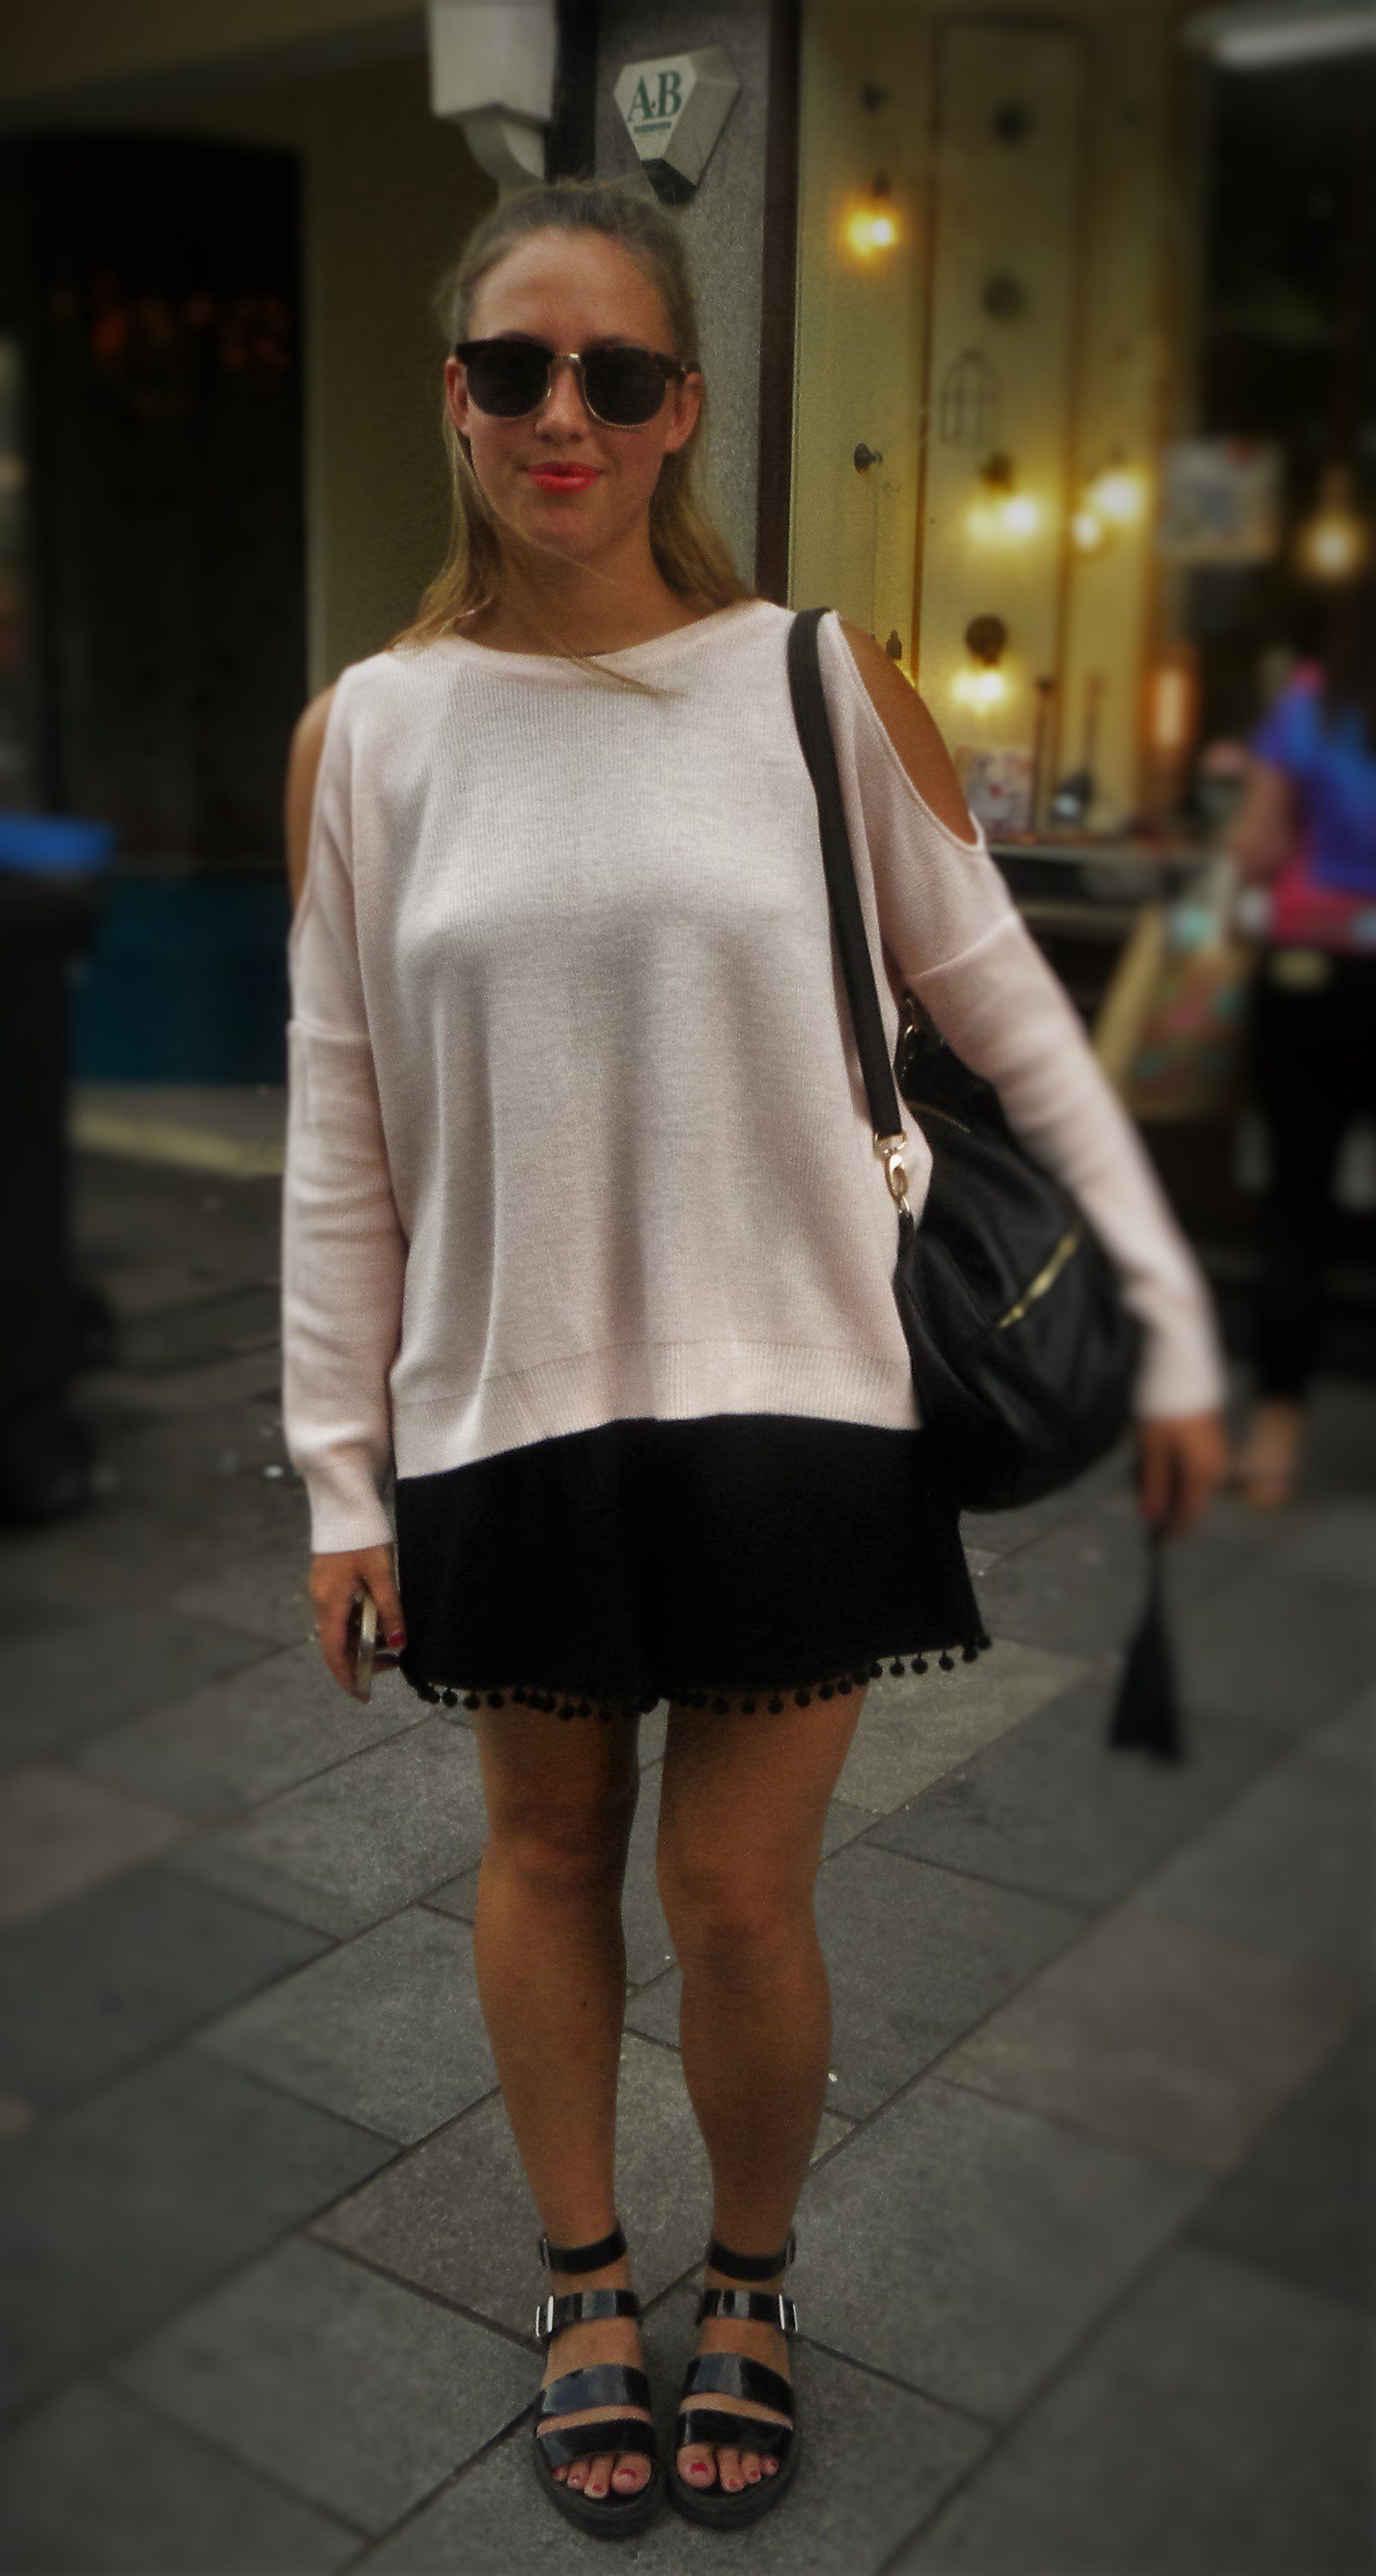 Shannon is wearing a top and skirt from Asos, shoes from Office and sunglasses H&M.